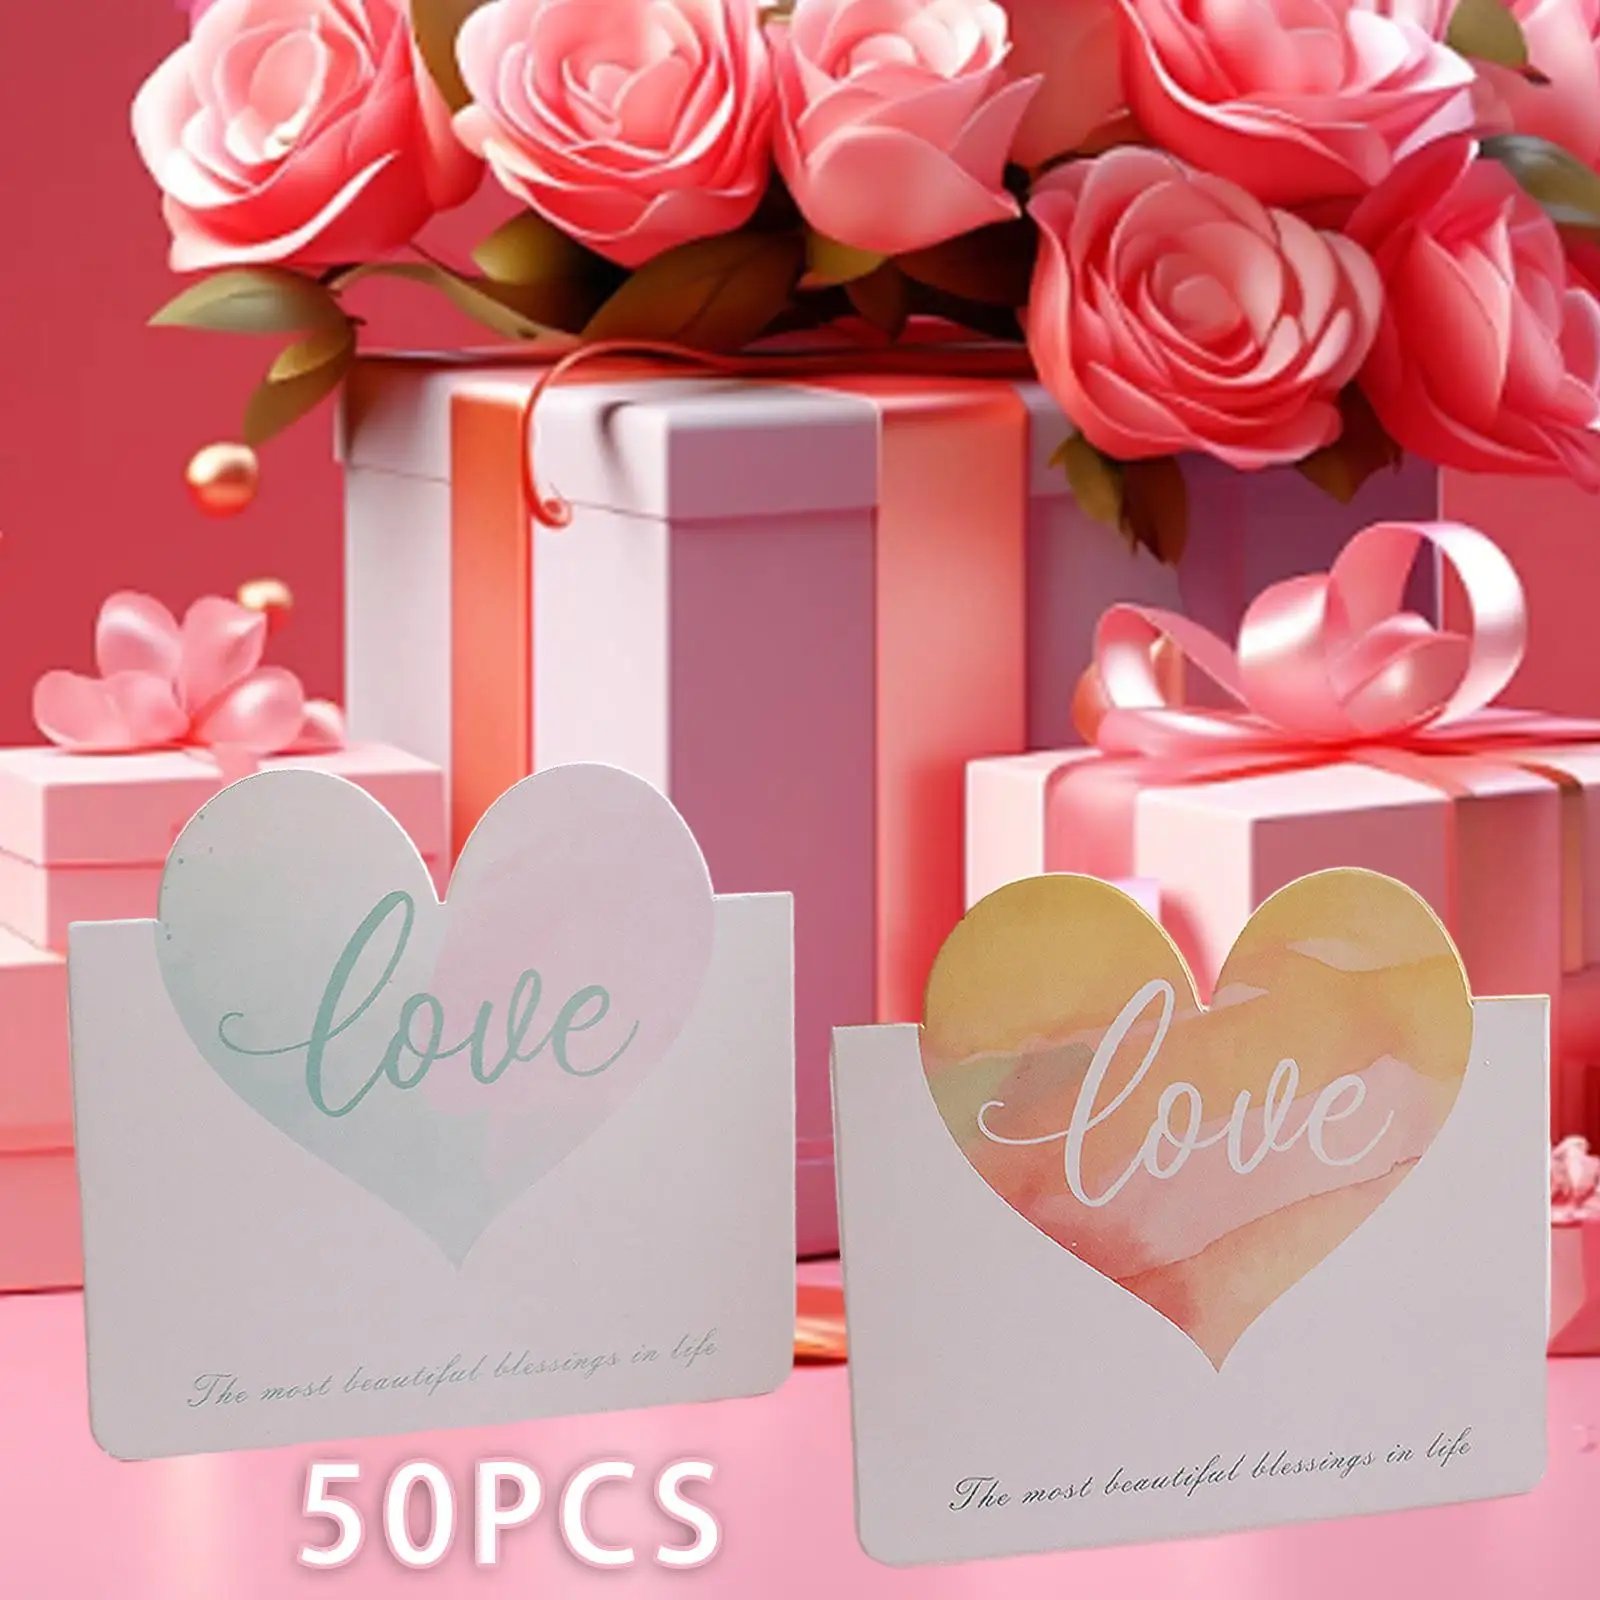 50x Valentines Day Cards Greeting Cards Flower Card Wedding Card for Anniversary